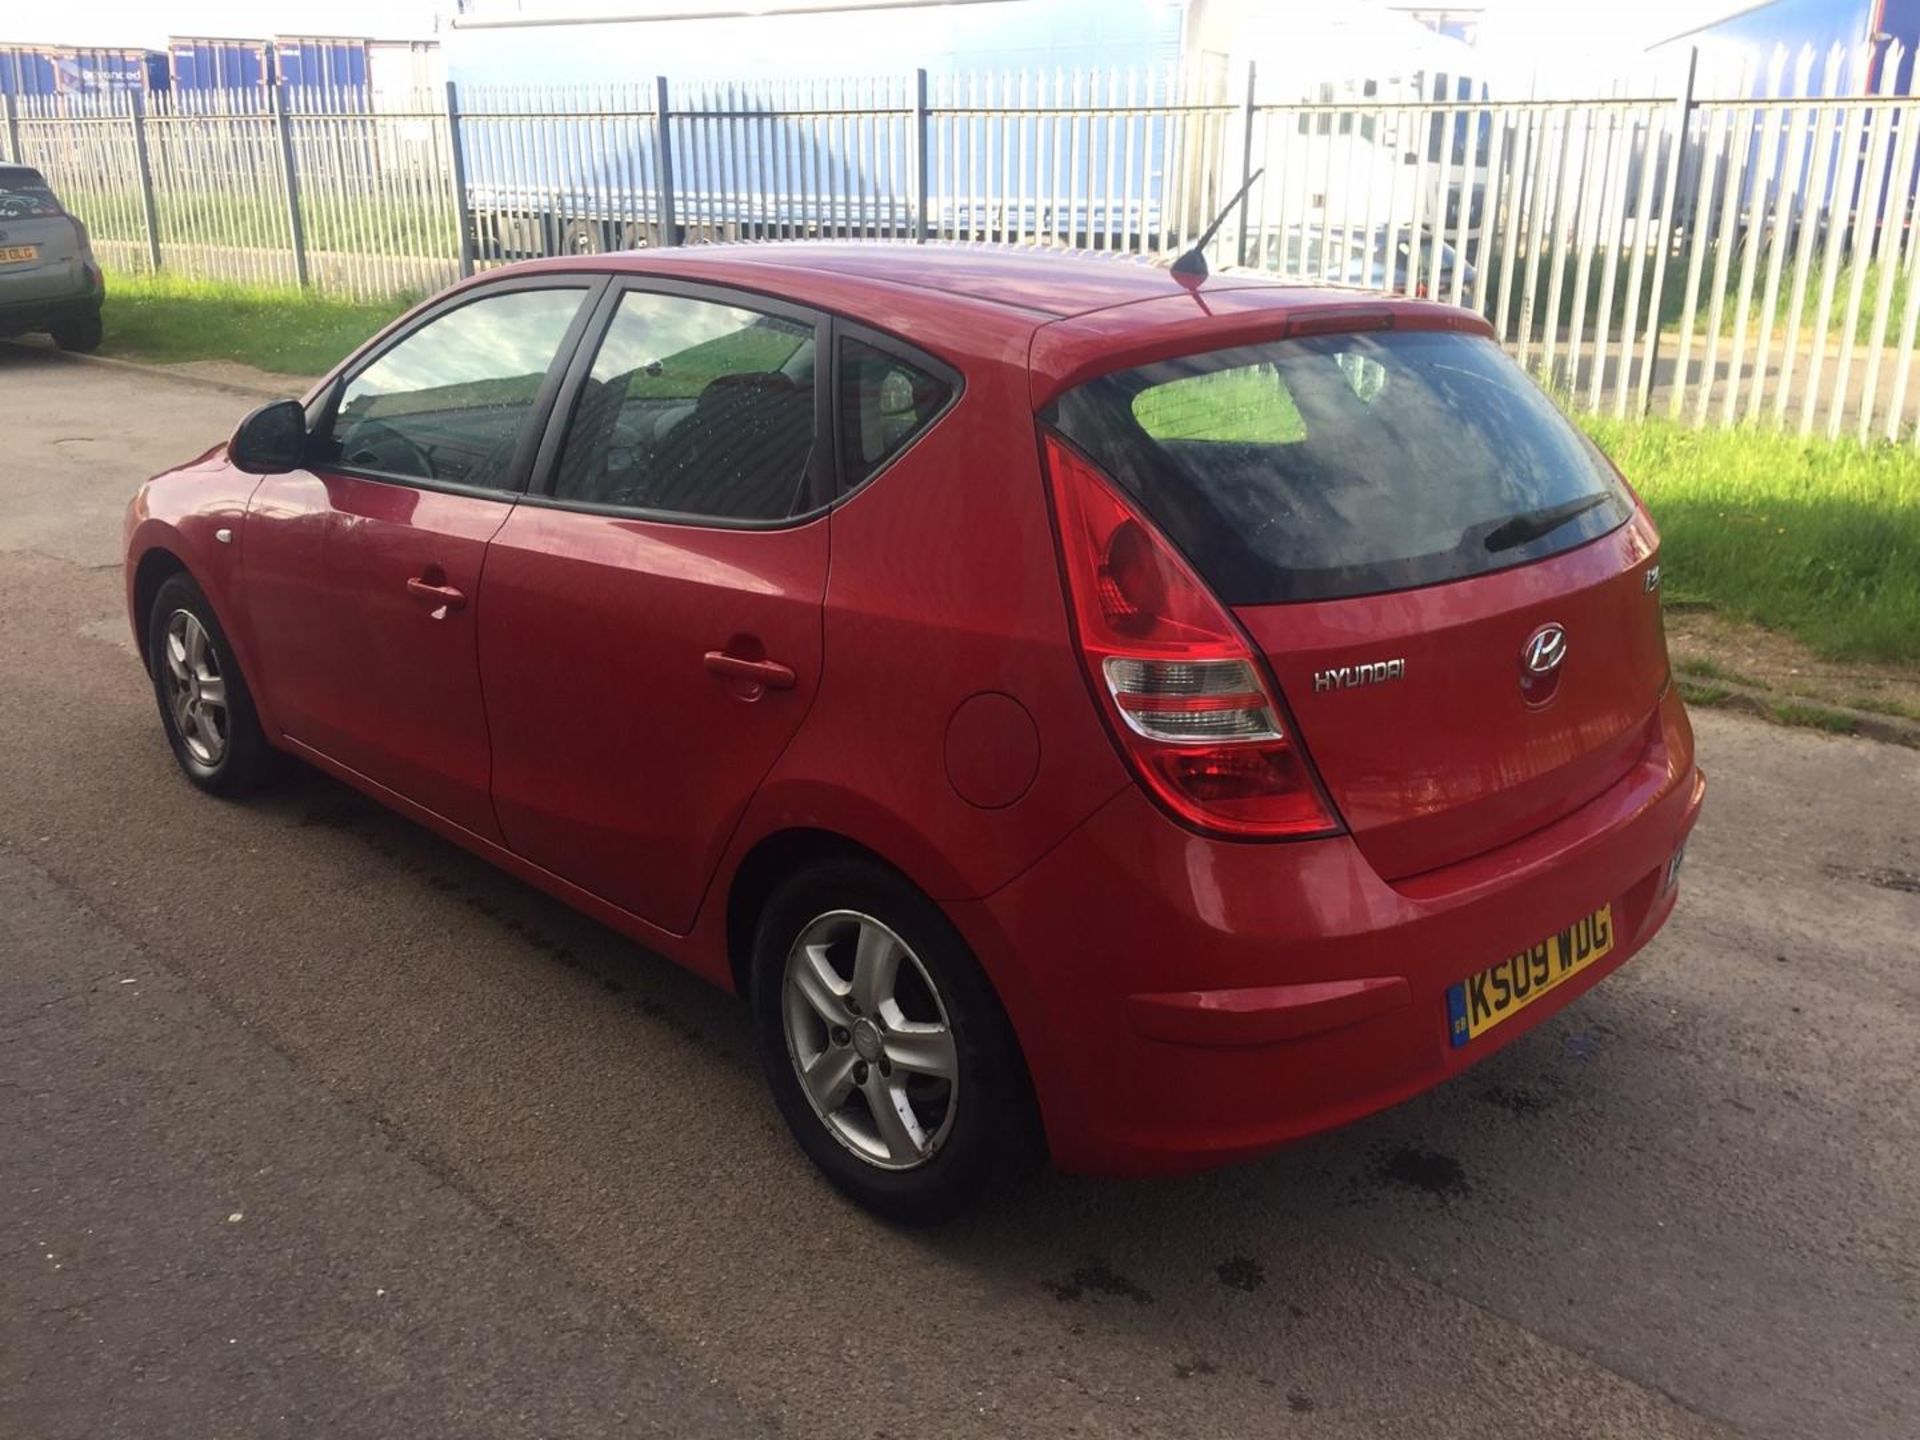 2009 Hyundai i30 Comfort 1.6 Petrol - CL505 - NO VAT ON THE HAMMER - Location: Corby - Image 5 of 11